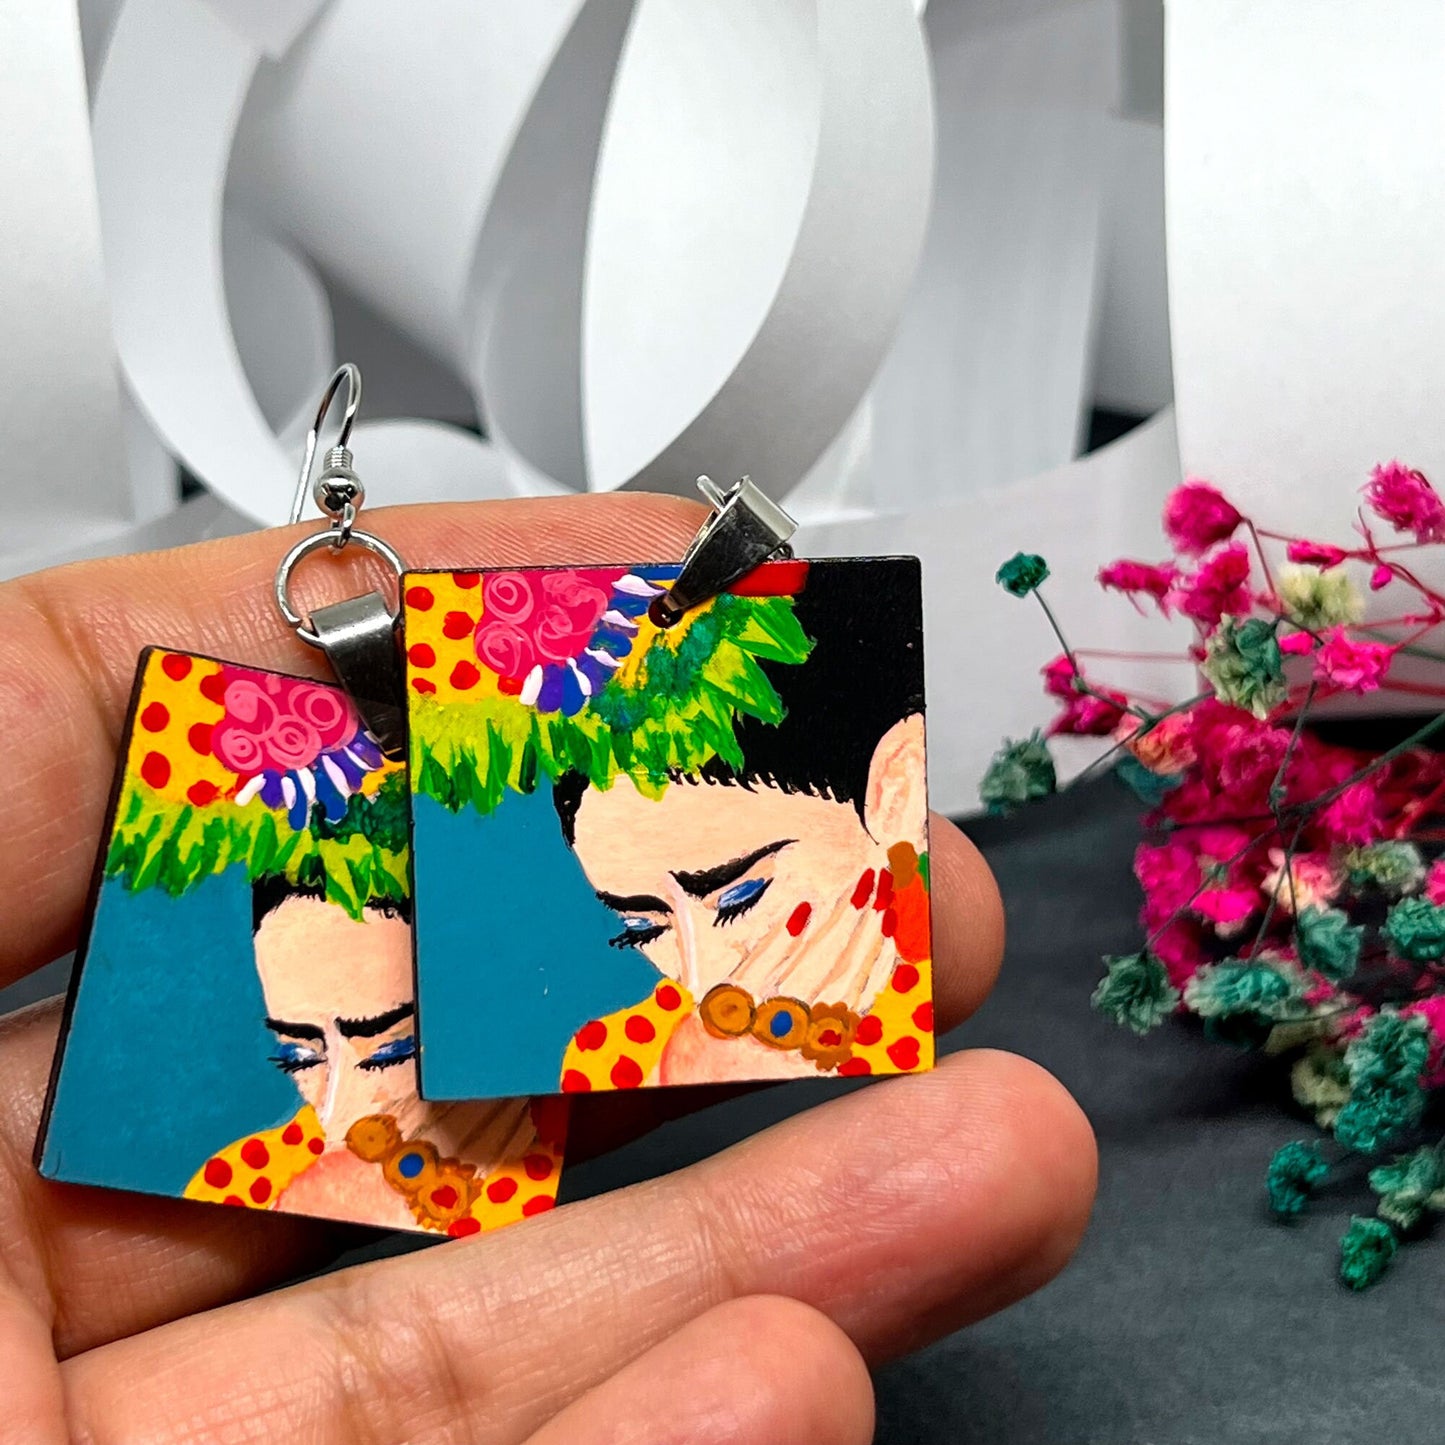 Enchanting and Majestic Frida Earrings Colorful Mexican Artist Portrait Jewelry Painted by Hand Artisan Mexico Folk Art to Wear Woman Gift